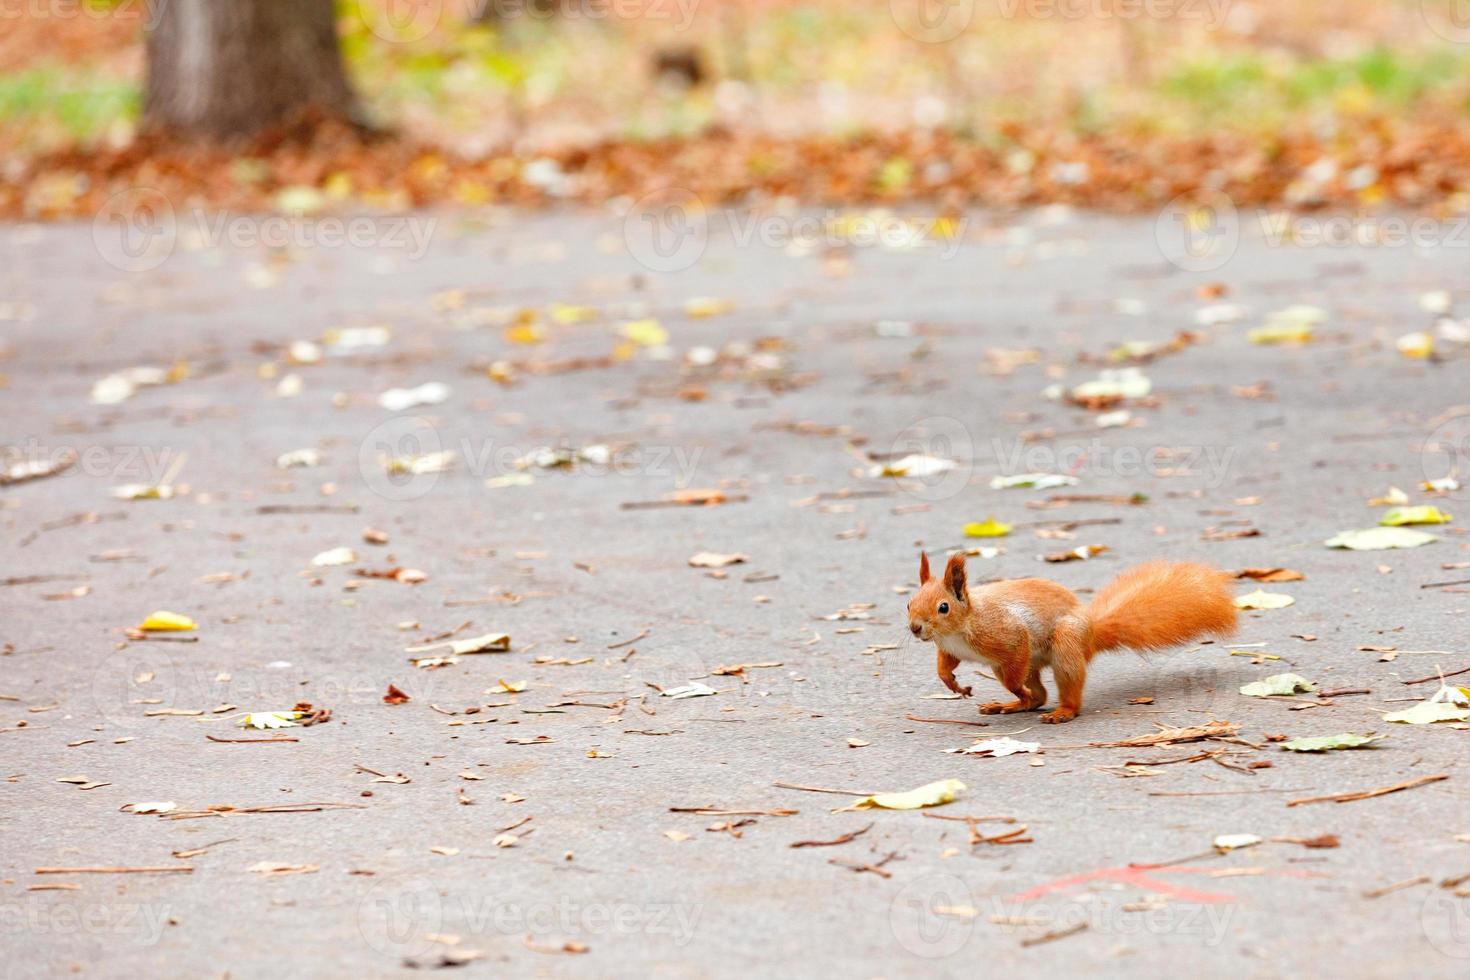 An orange squirrel with a magnificent fluffy tail prepares to jump for a treat. photo